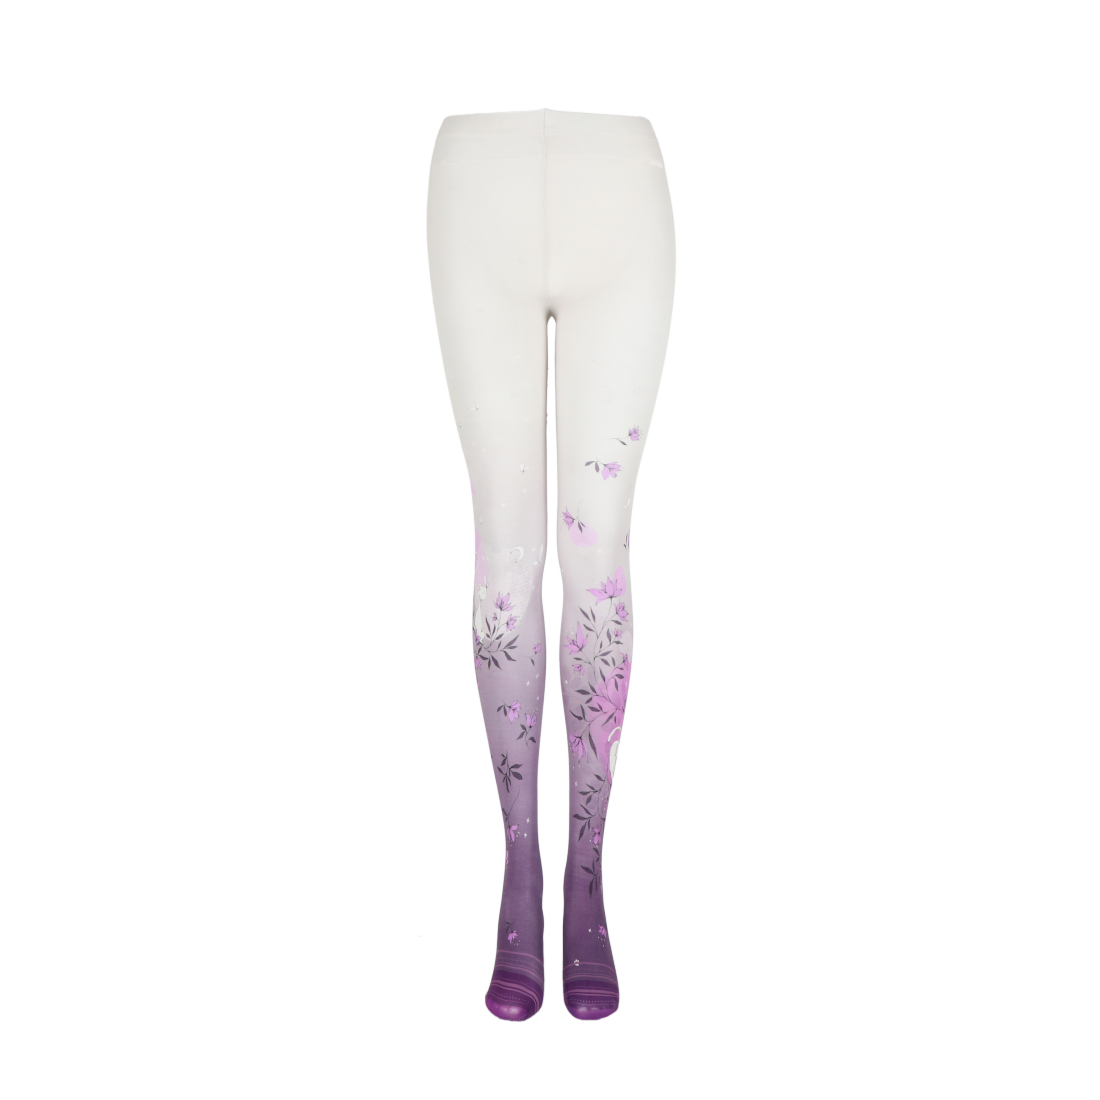 EMBROIDERY TIGHTS｜CHIN FU LONG INDUSTRIAL CO., LTD.